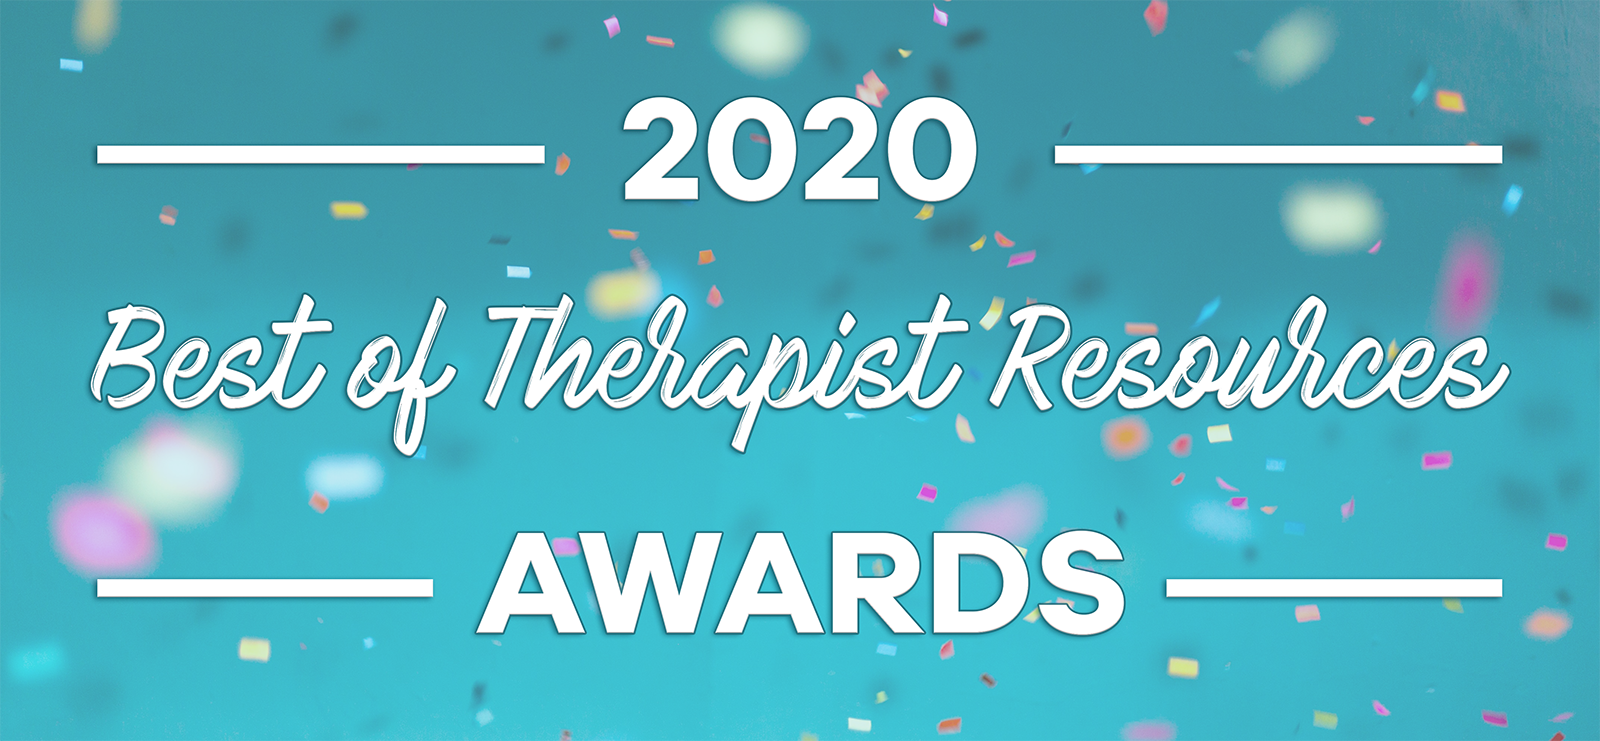 Banner | 2020 Best of Therapist Resources Awards | Brighter Vision | Therapist Websites & Marketing Solutions